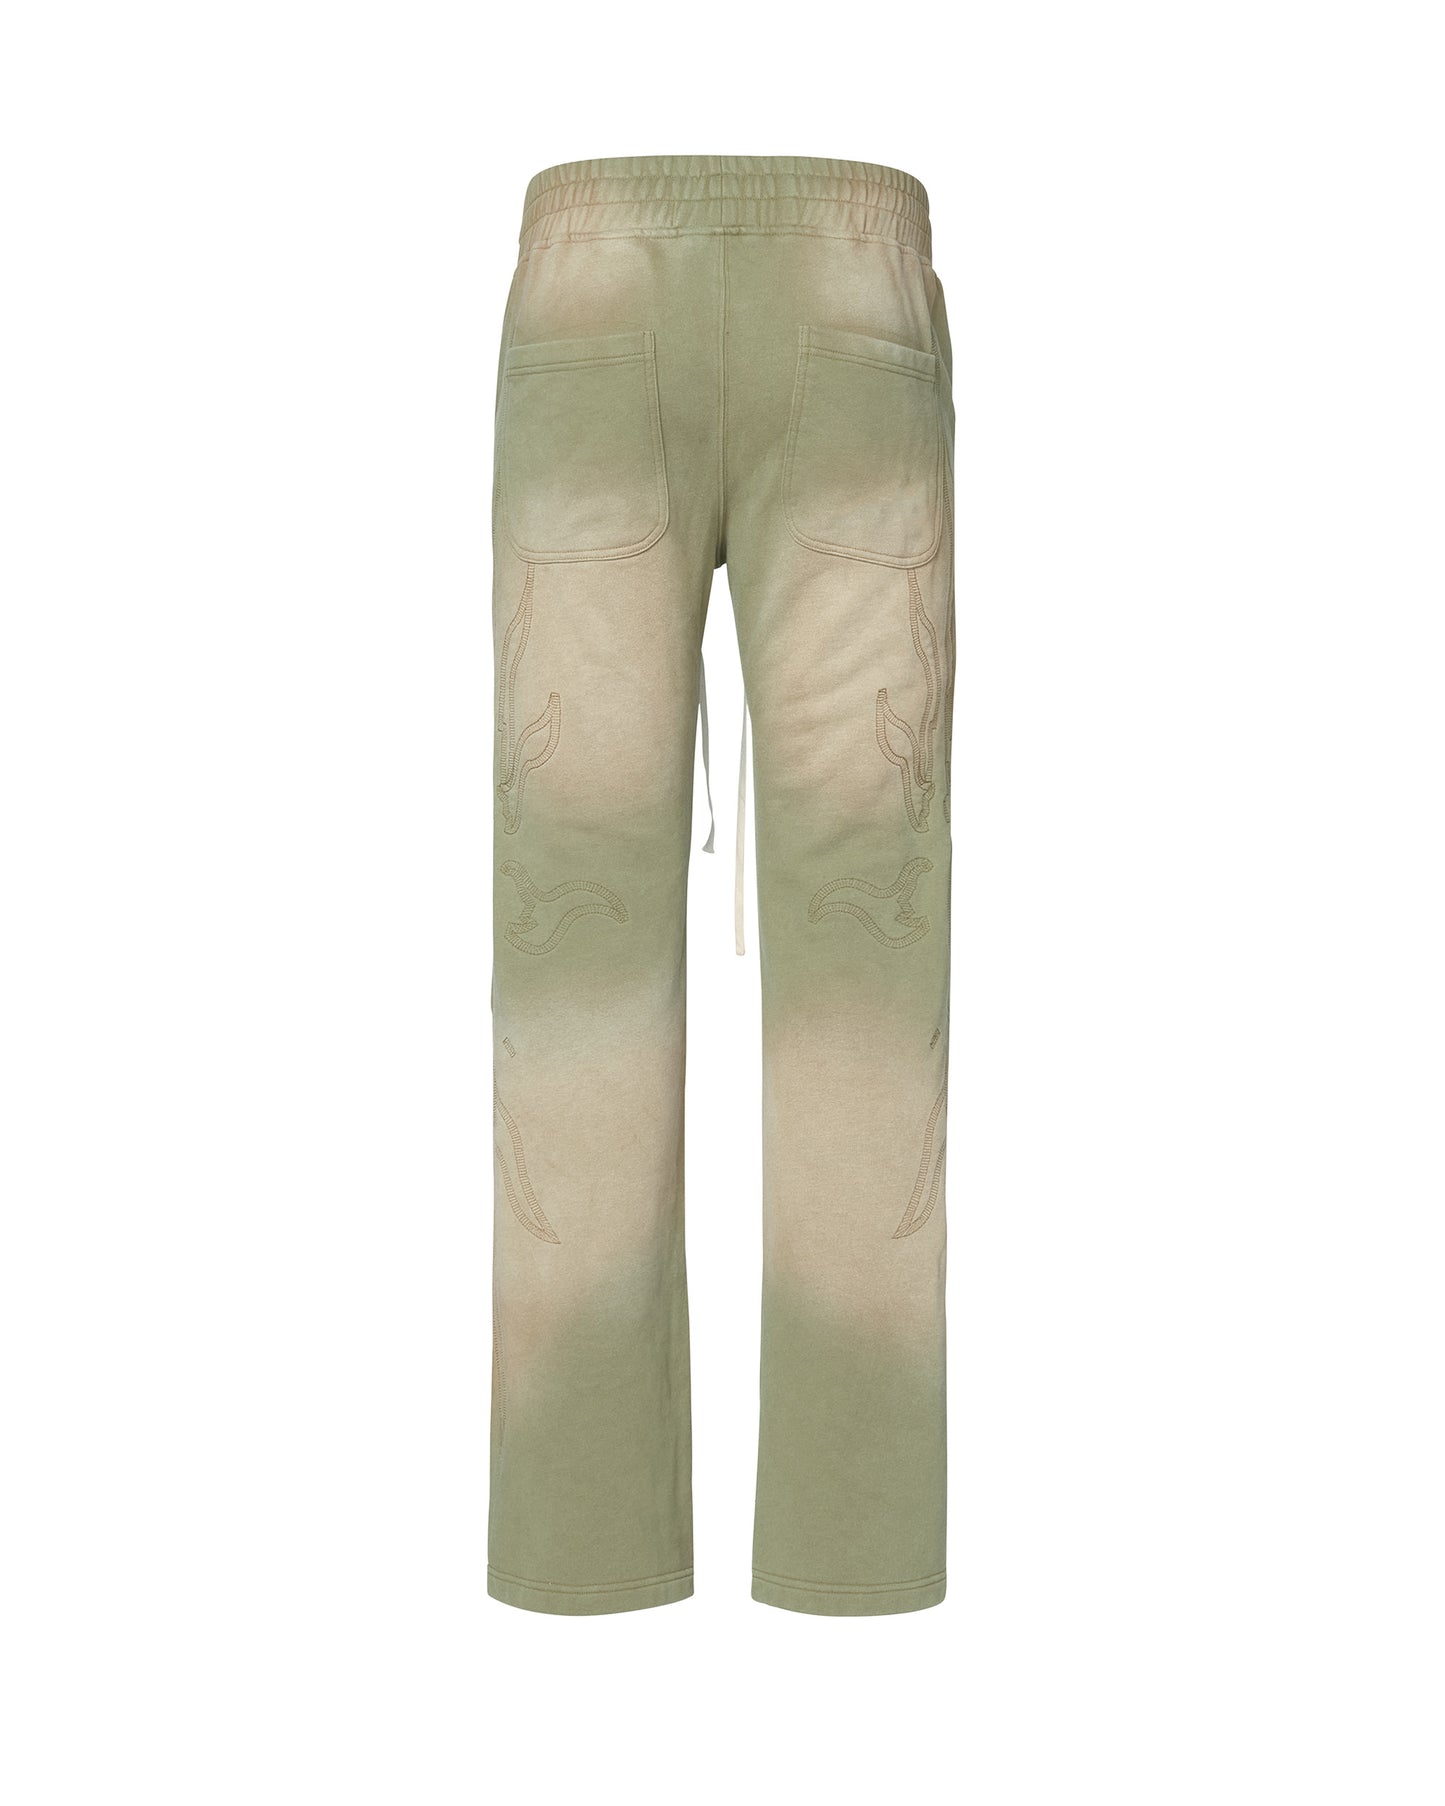 VALE VALLEY FOREST SWEATPANTS